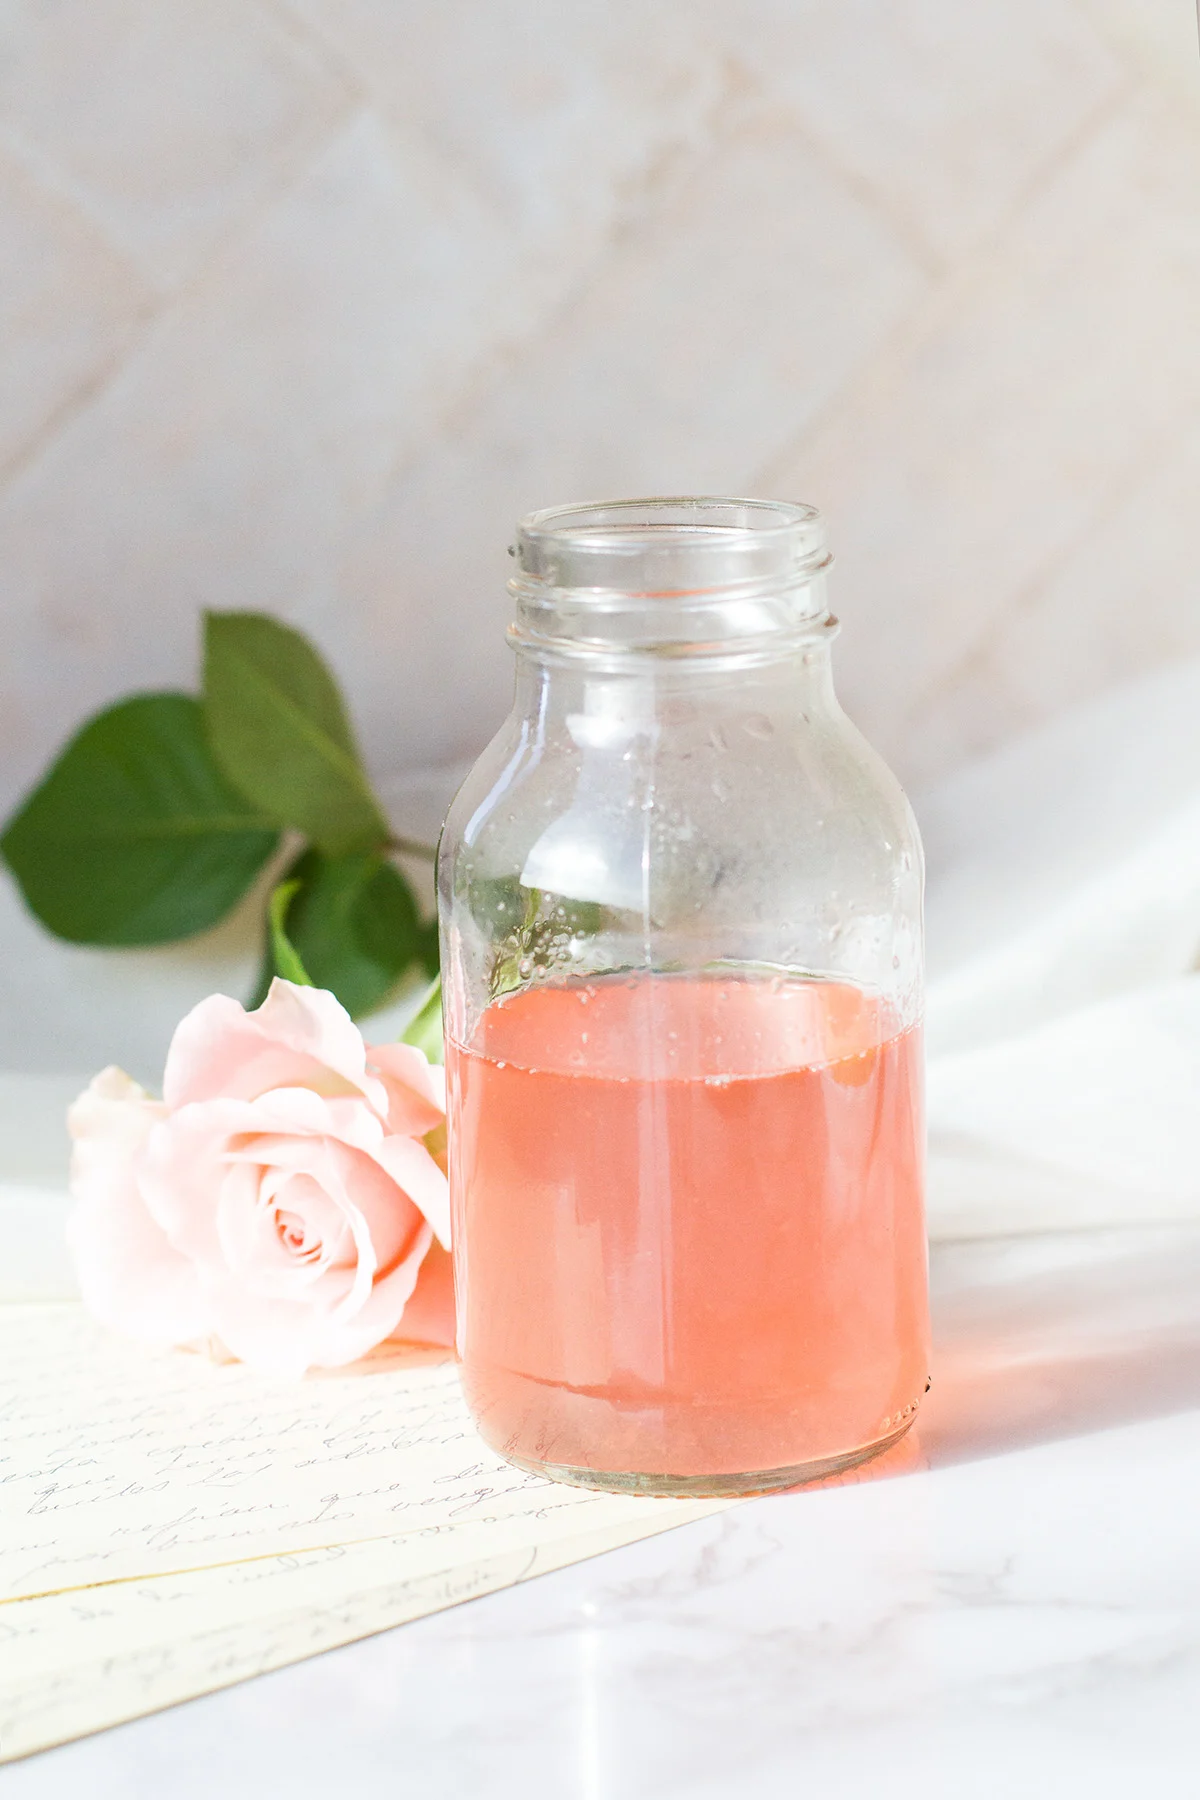 Rhubarb syrup in a glass bottle, pink rose in the background.